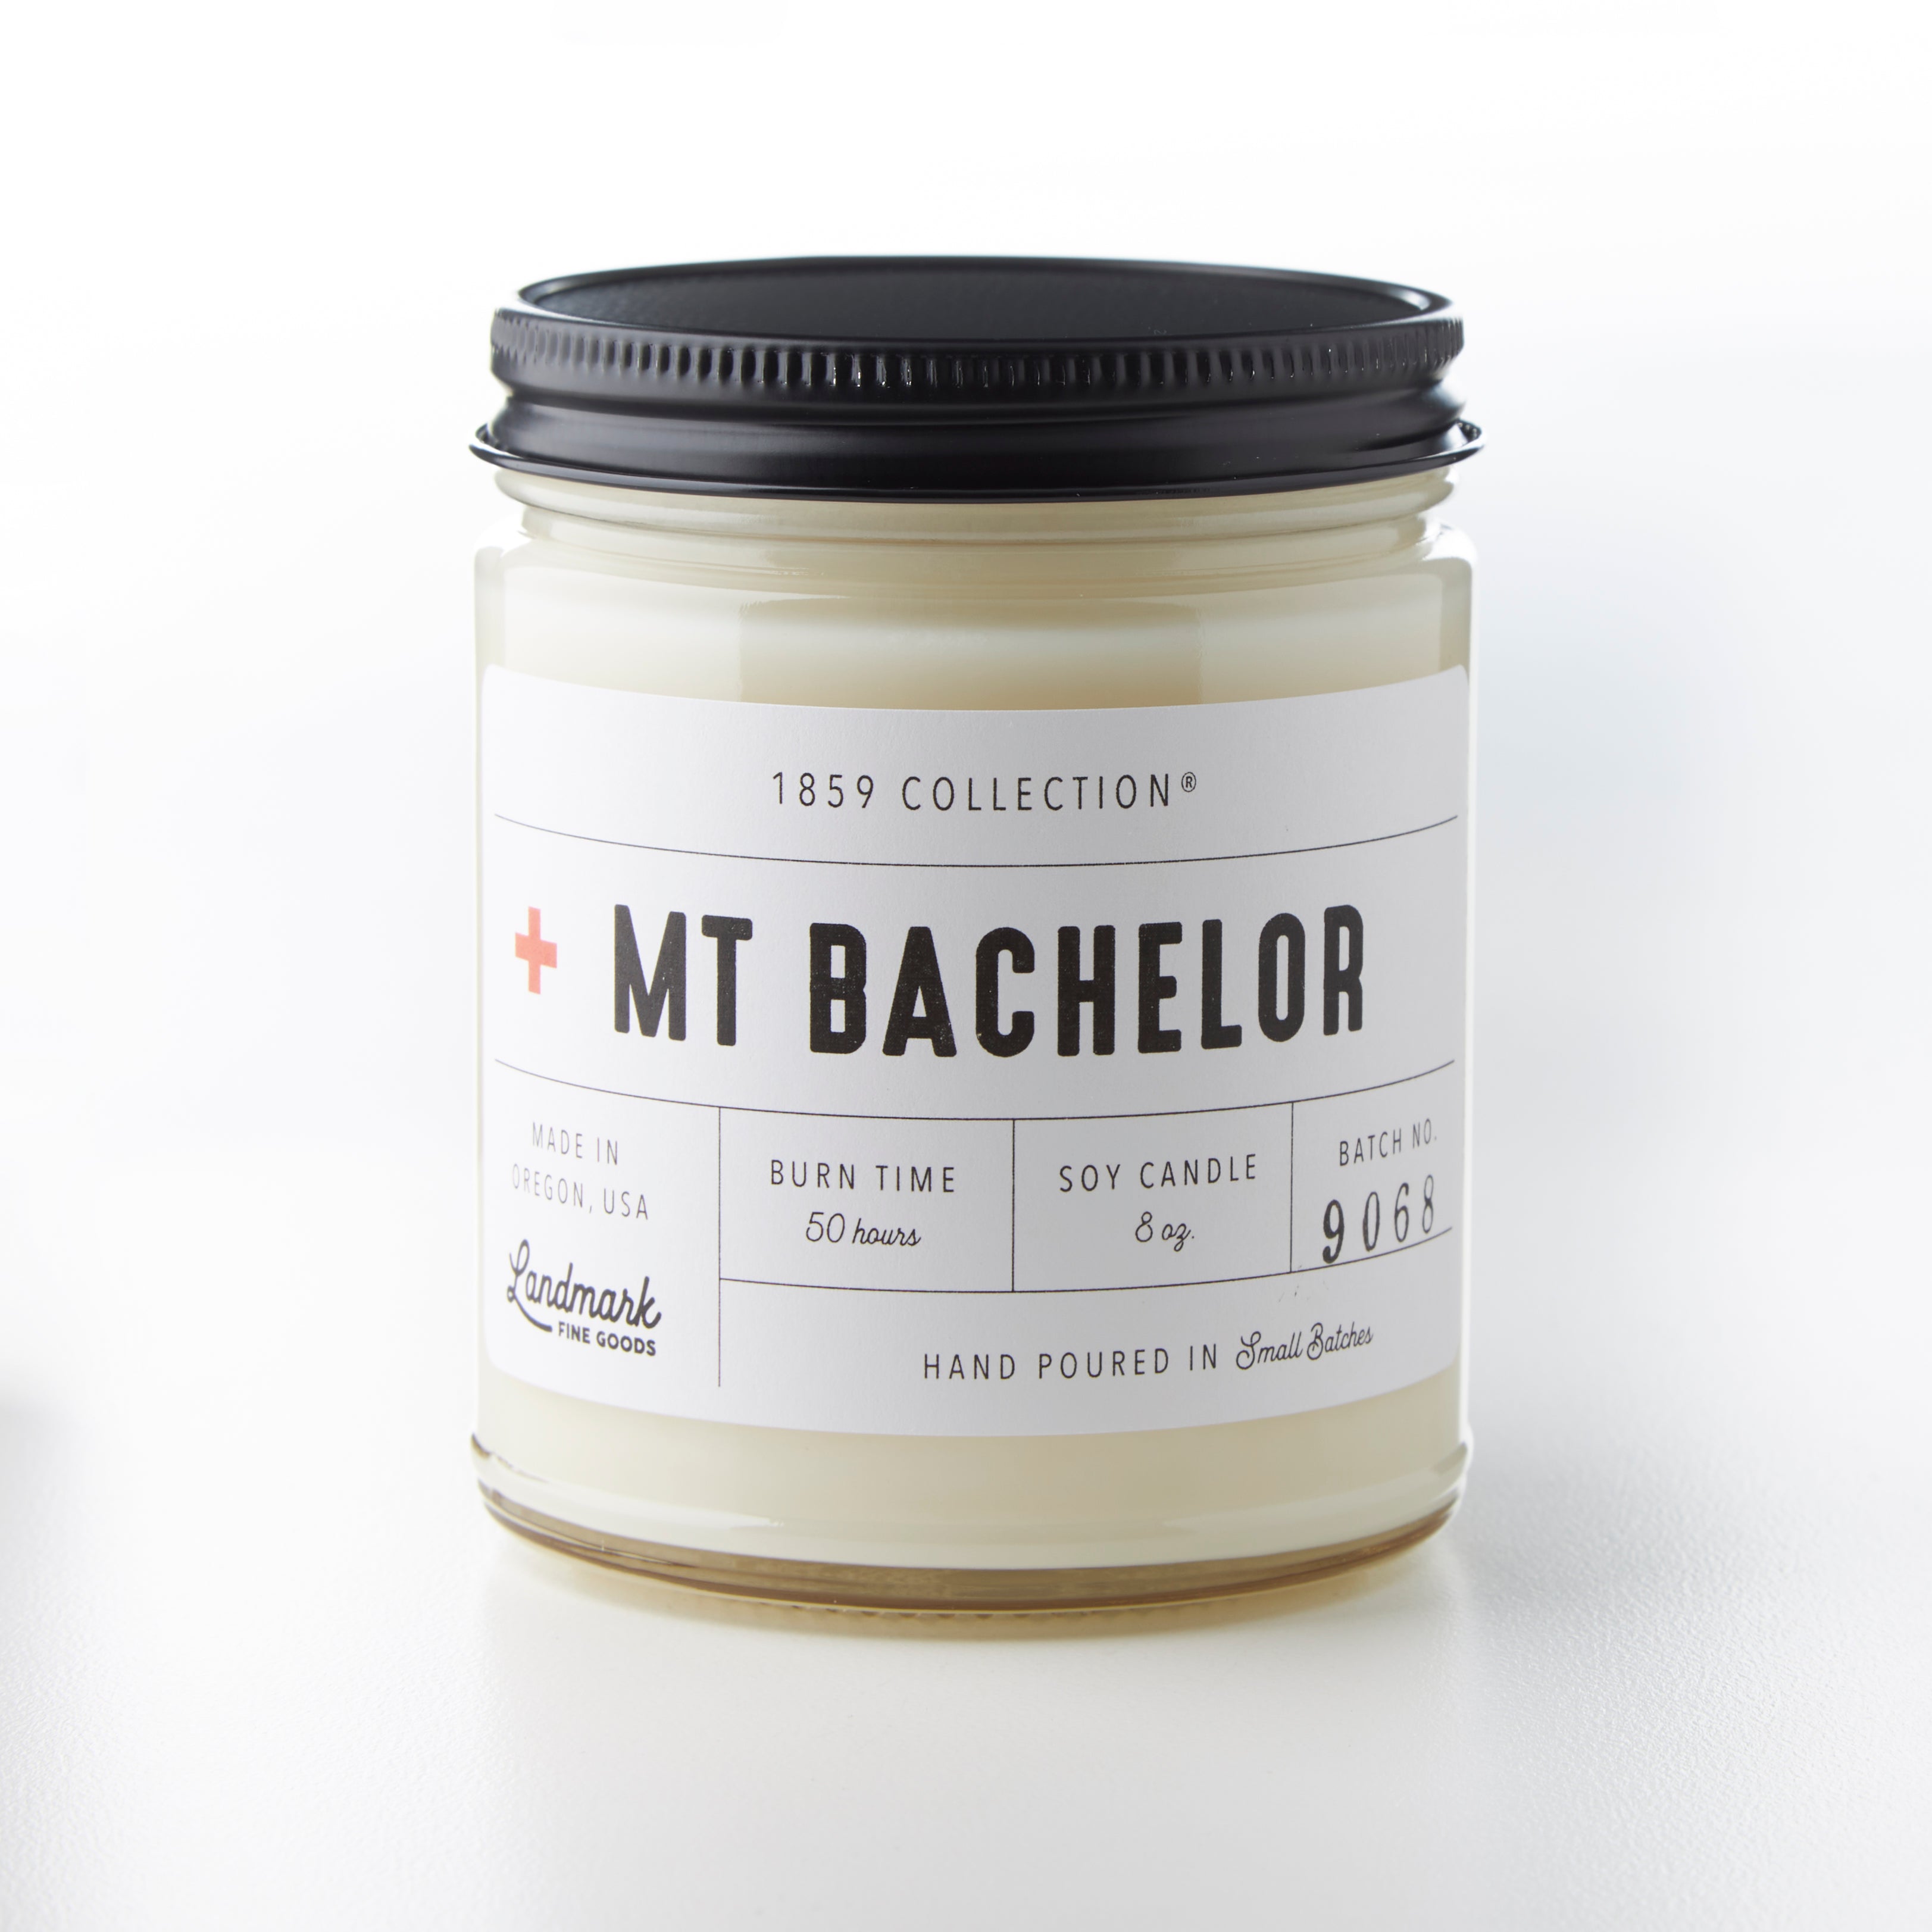 Mt Bachelor Candle - 1859 Collection®